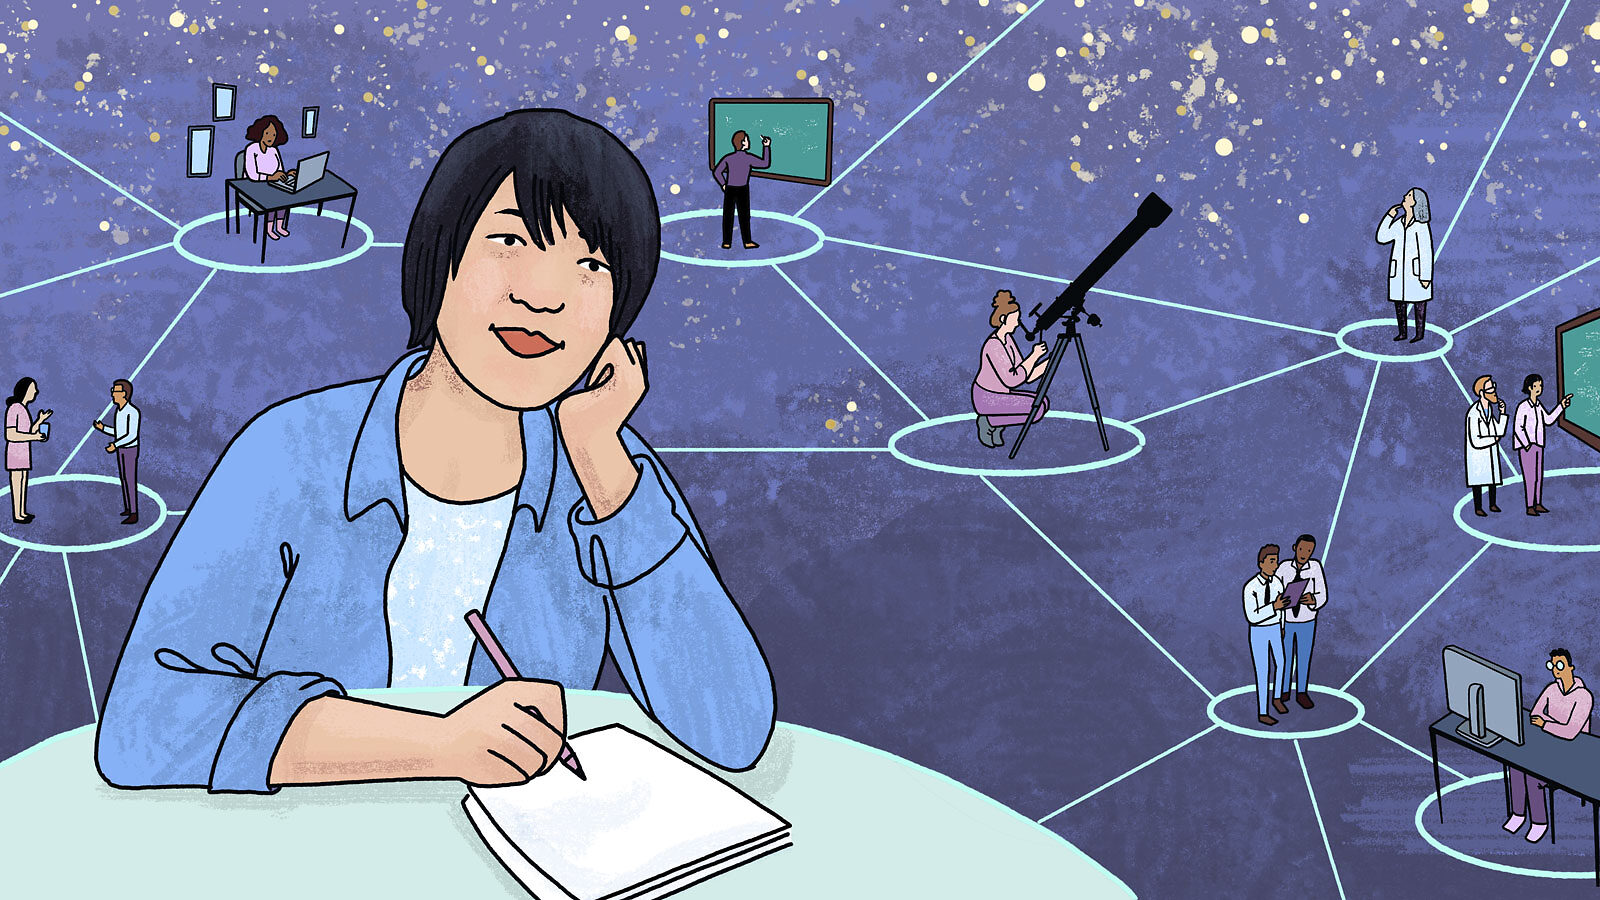 Illustration of Sal Fu She is shown as part of a connected network of scientists working on various projects